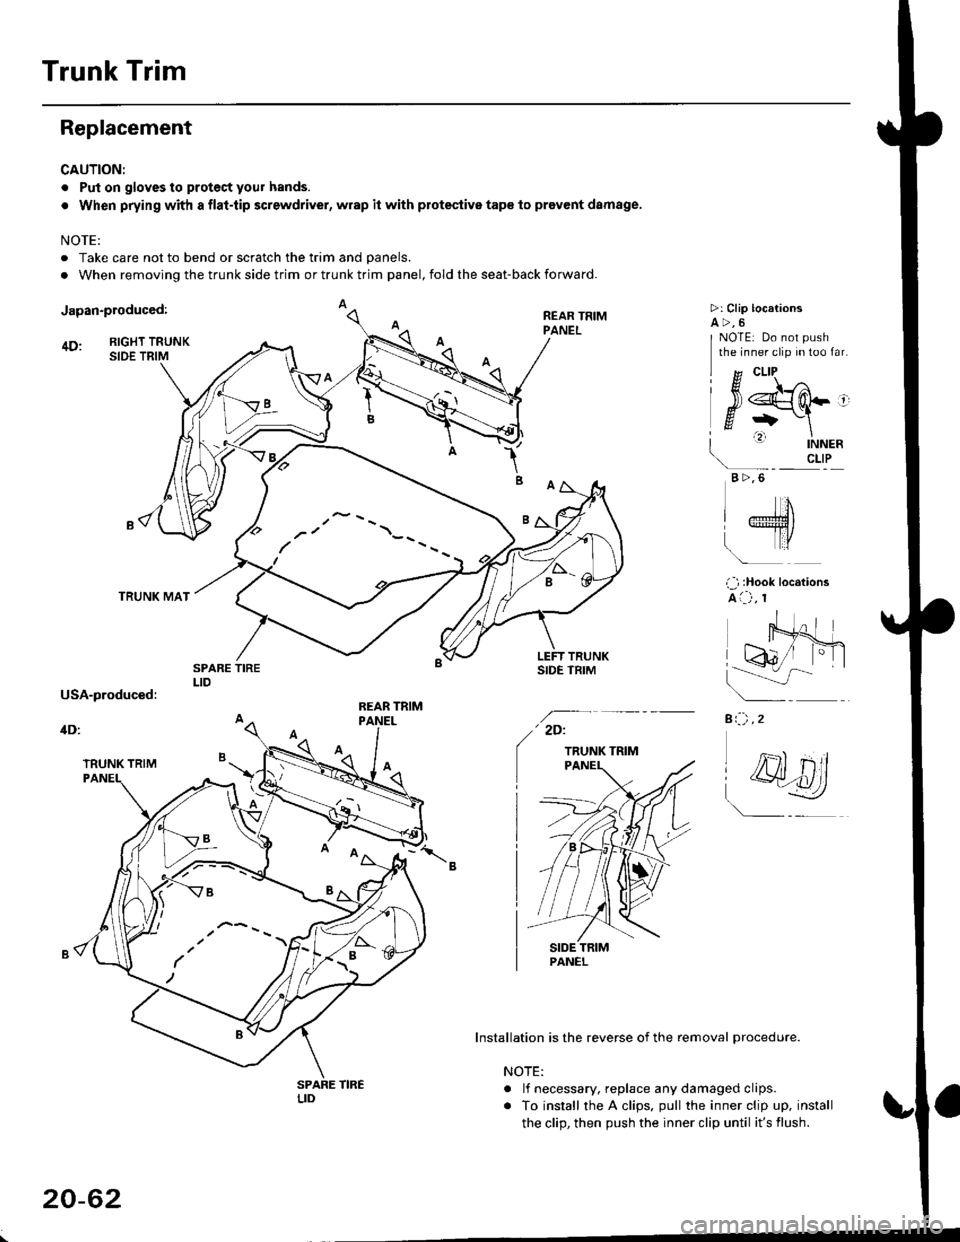 HONDA CIVIC 1998 6.G Workshop Manual Trunk Trim
Replacement
CAUTION:
. Put on gloves to proteci your hands.
. When prying with a flat-tip screwdriver, wrap it with protestive tap€ lo prevent damage.
NOTE:
. Take care not to bend or scr